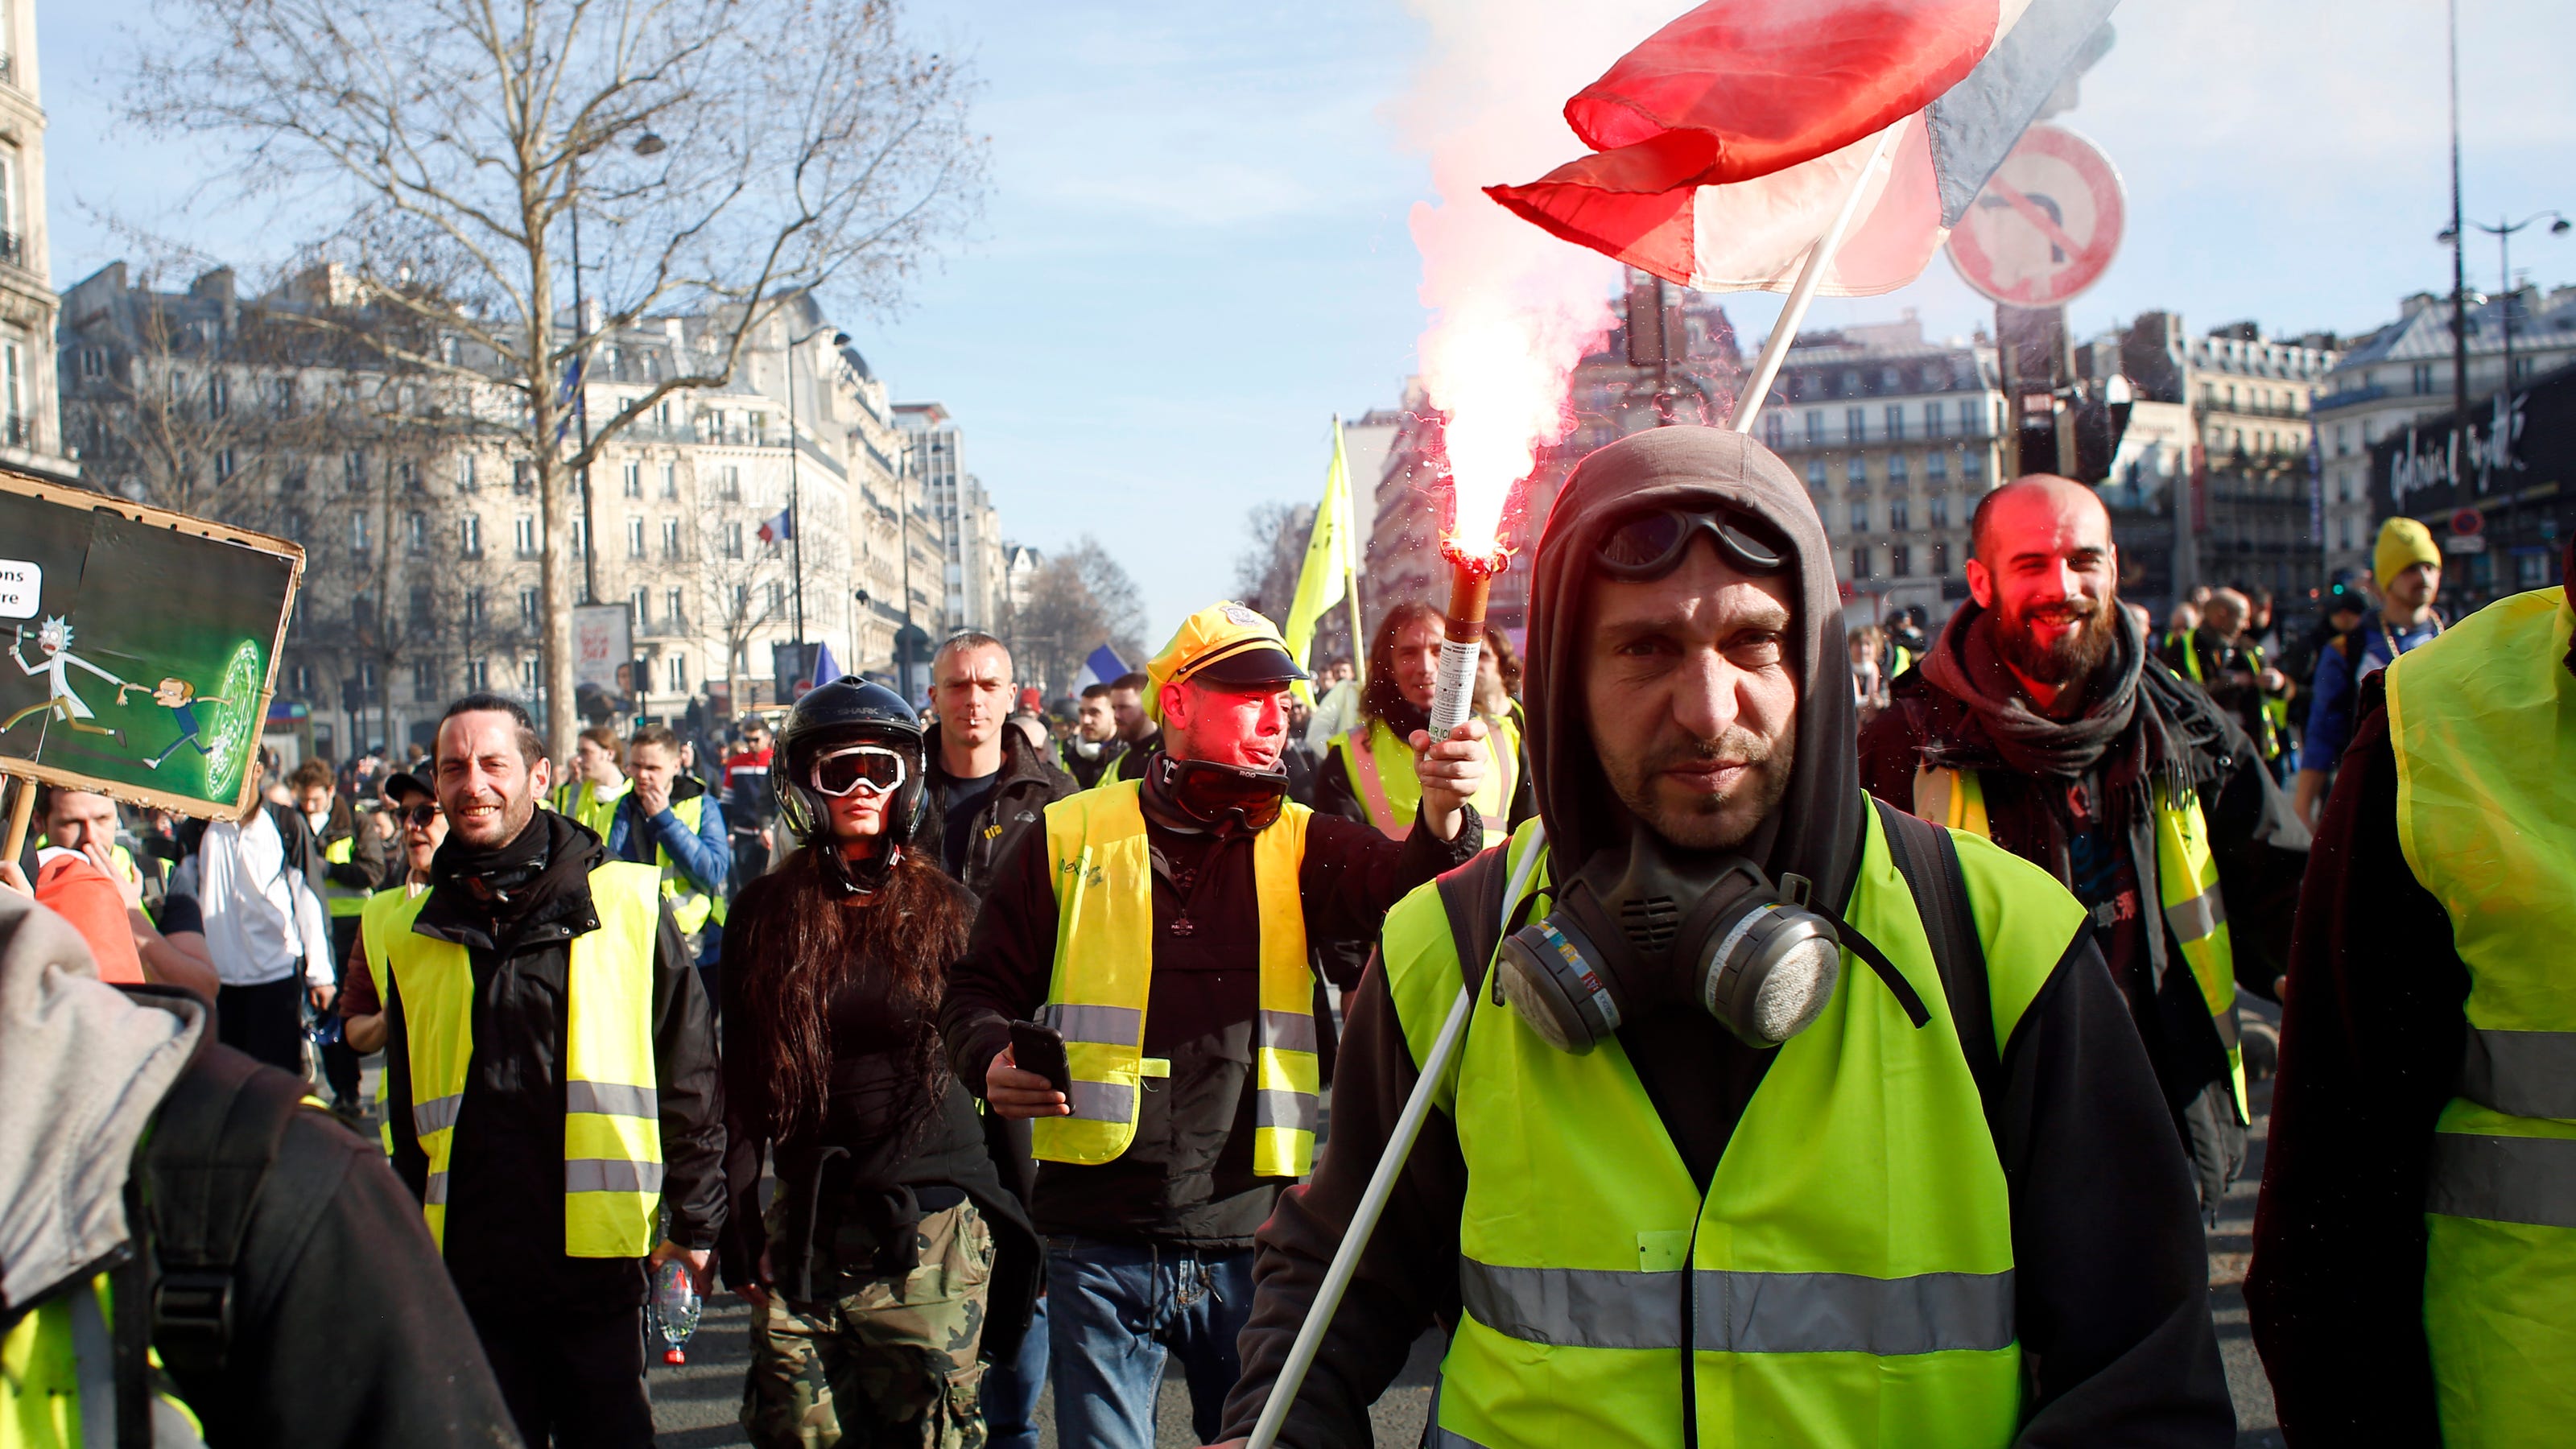 Yellow vest protest Tear gas, hate speech mark latest march in Paris